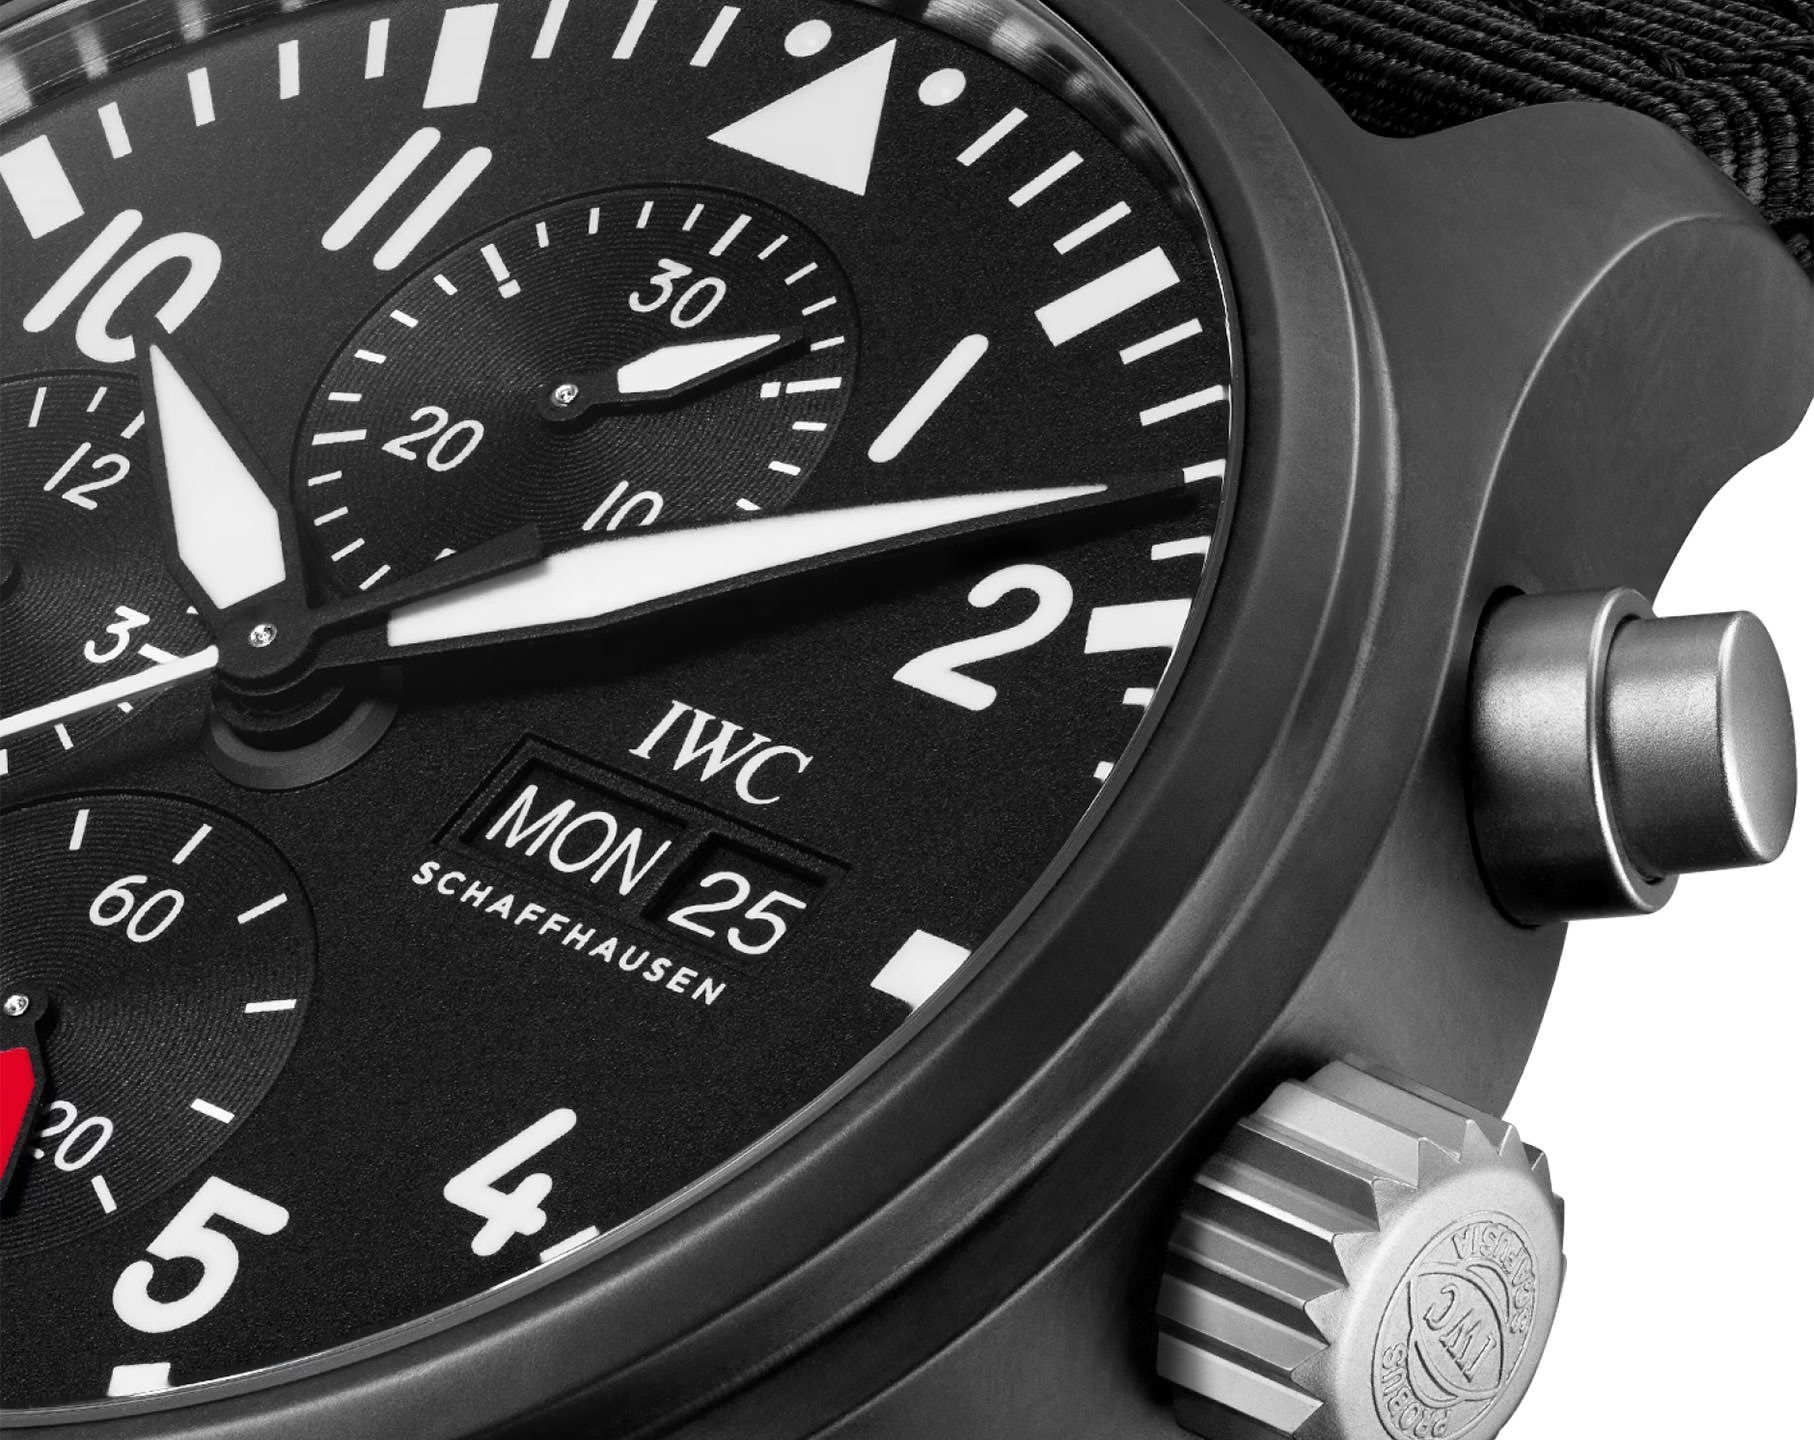 IWC Performance Materials 44.5 mm Watch in Black Dial For Men - 5